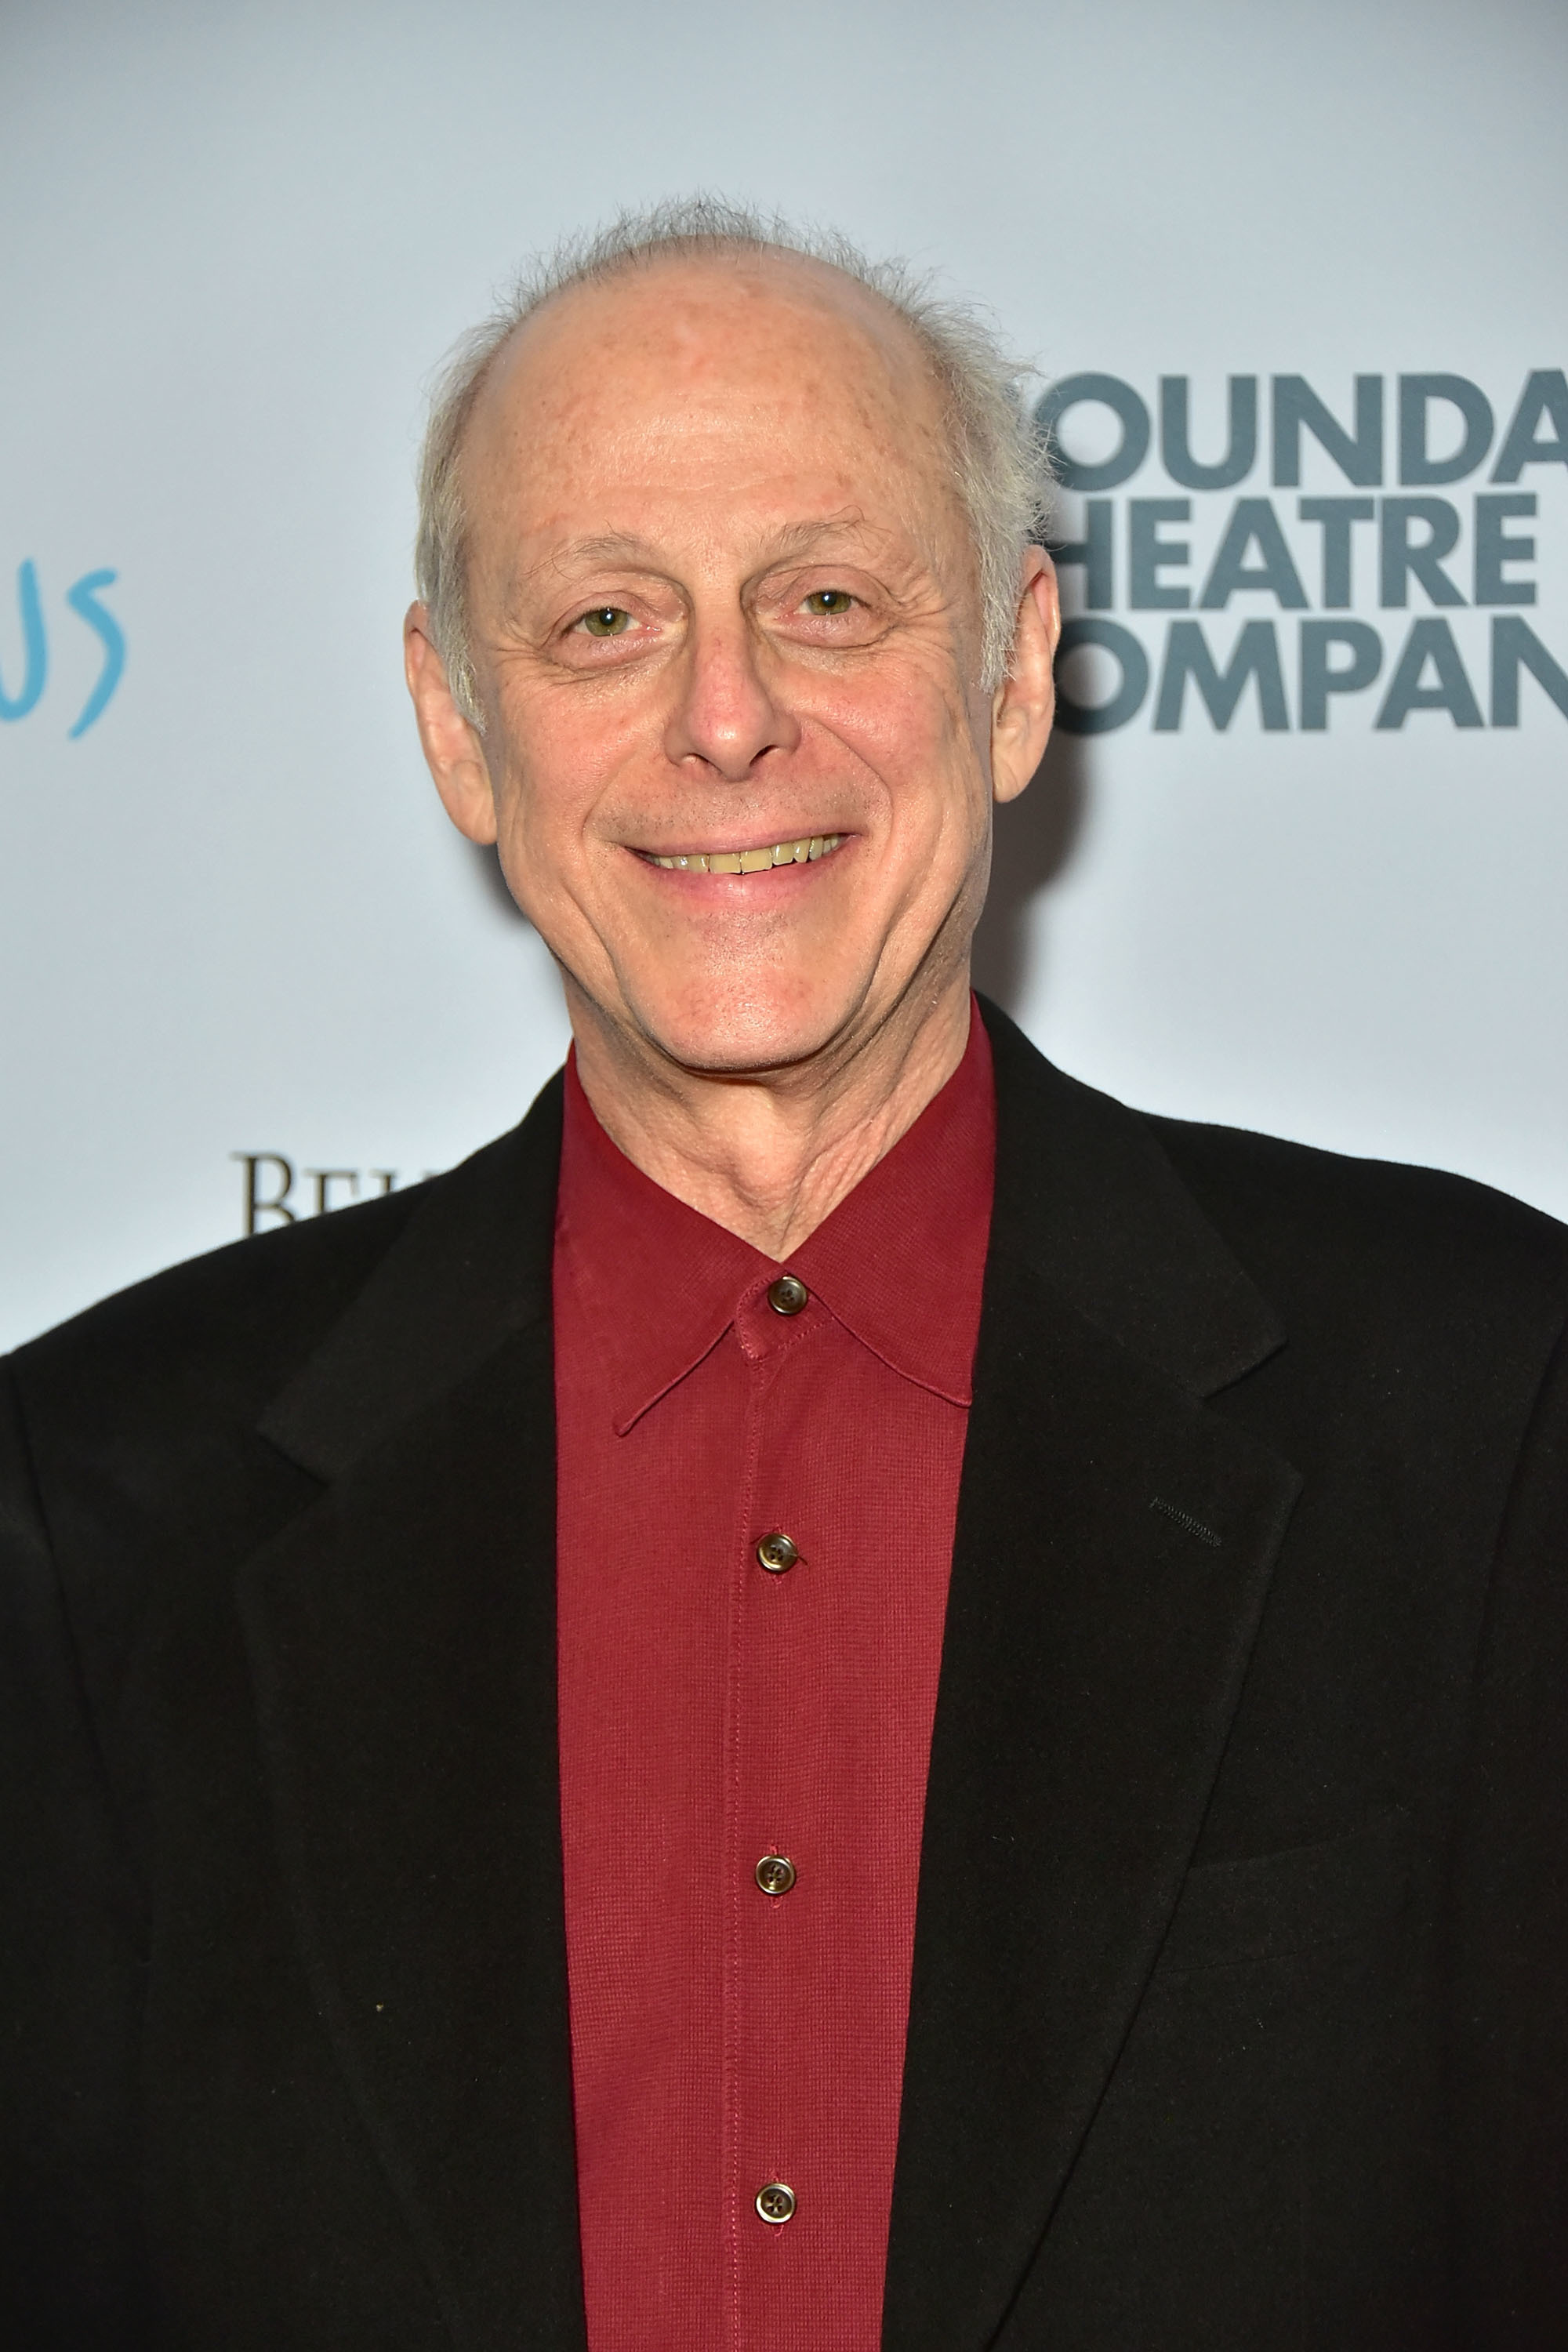 <p>On March 25, actor Mark Blum died after contracting the novel coronavirus. He was 69. Mark rose to fame after landing a starring role in the 1985 film "Desperately Seeking Susan." The New York City native, a theater veteran, also notably appeared in films including "Crocodile Dundee" and "I Don't Know How She Does It" and in more recent years was on TV's "Succession," "You" and "Mozart in the Jungle."</p>